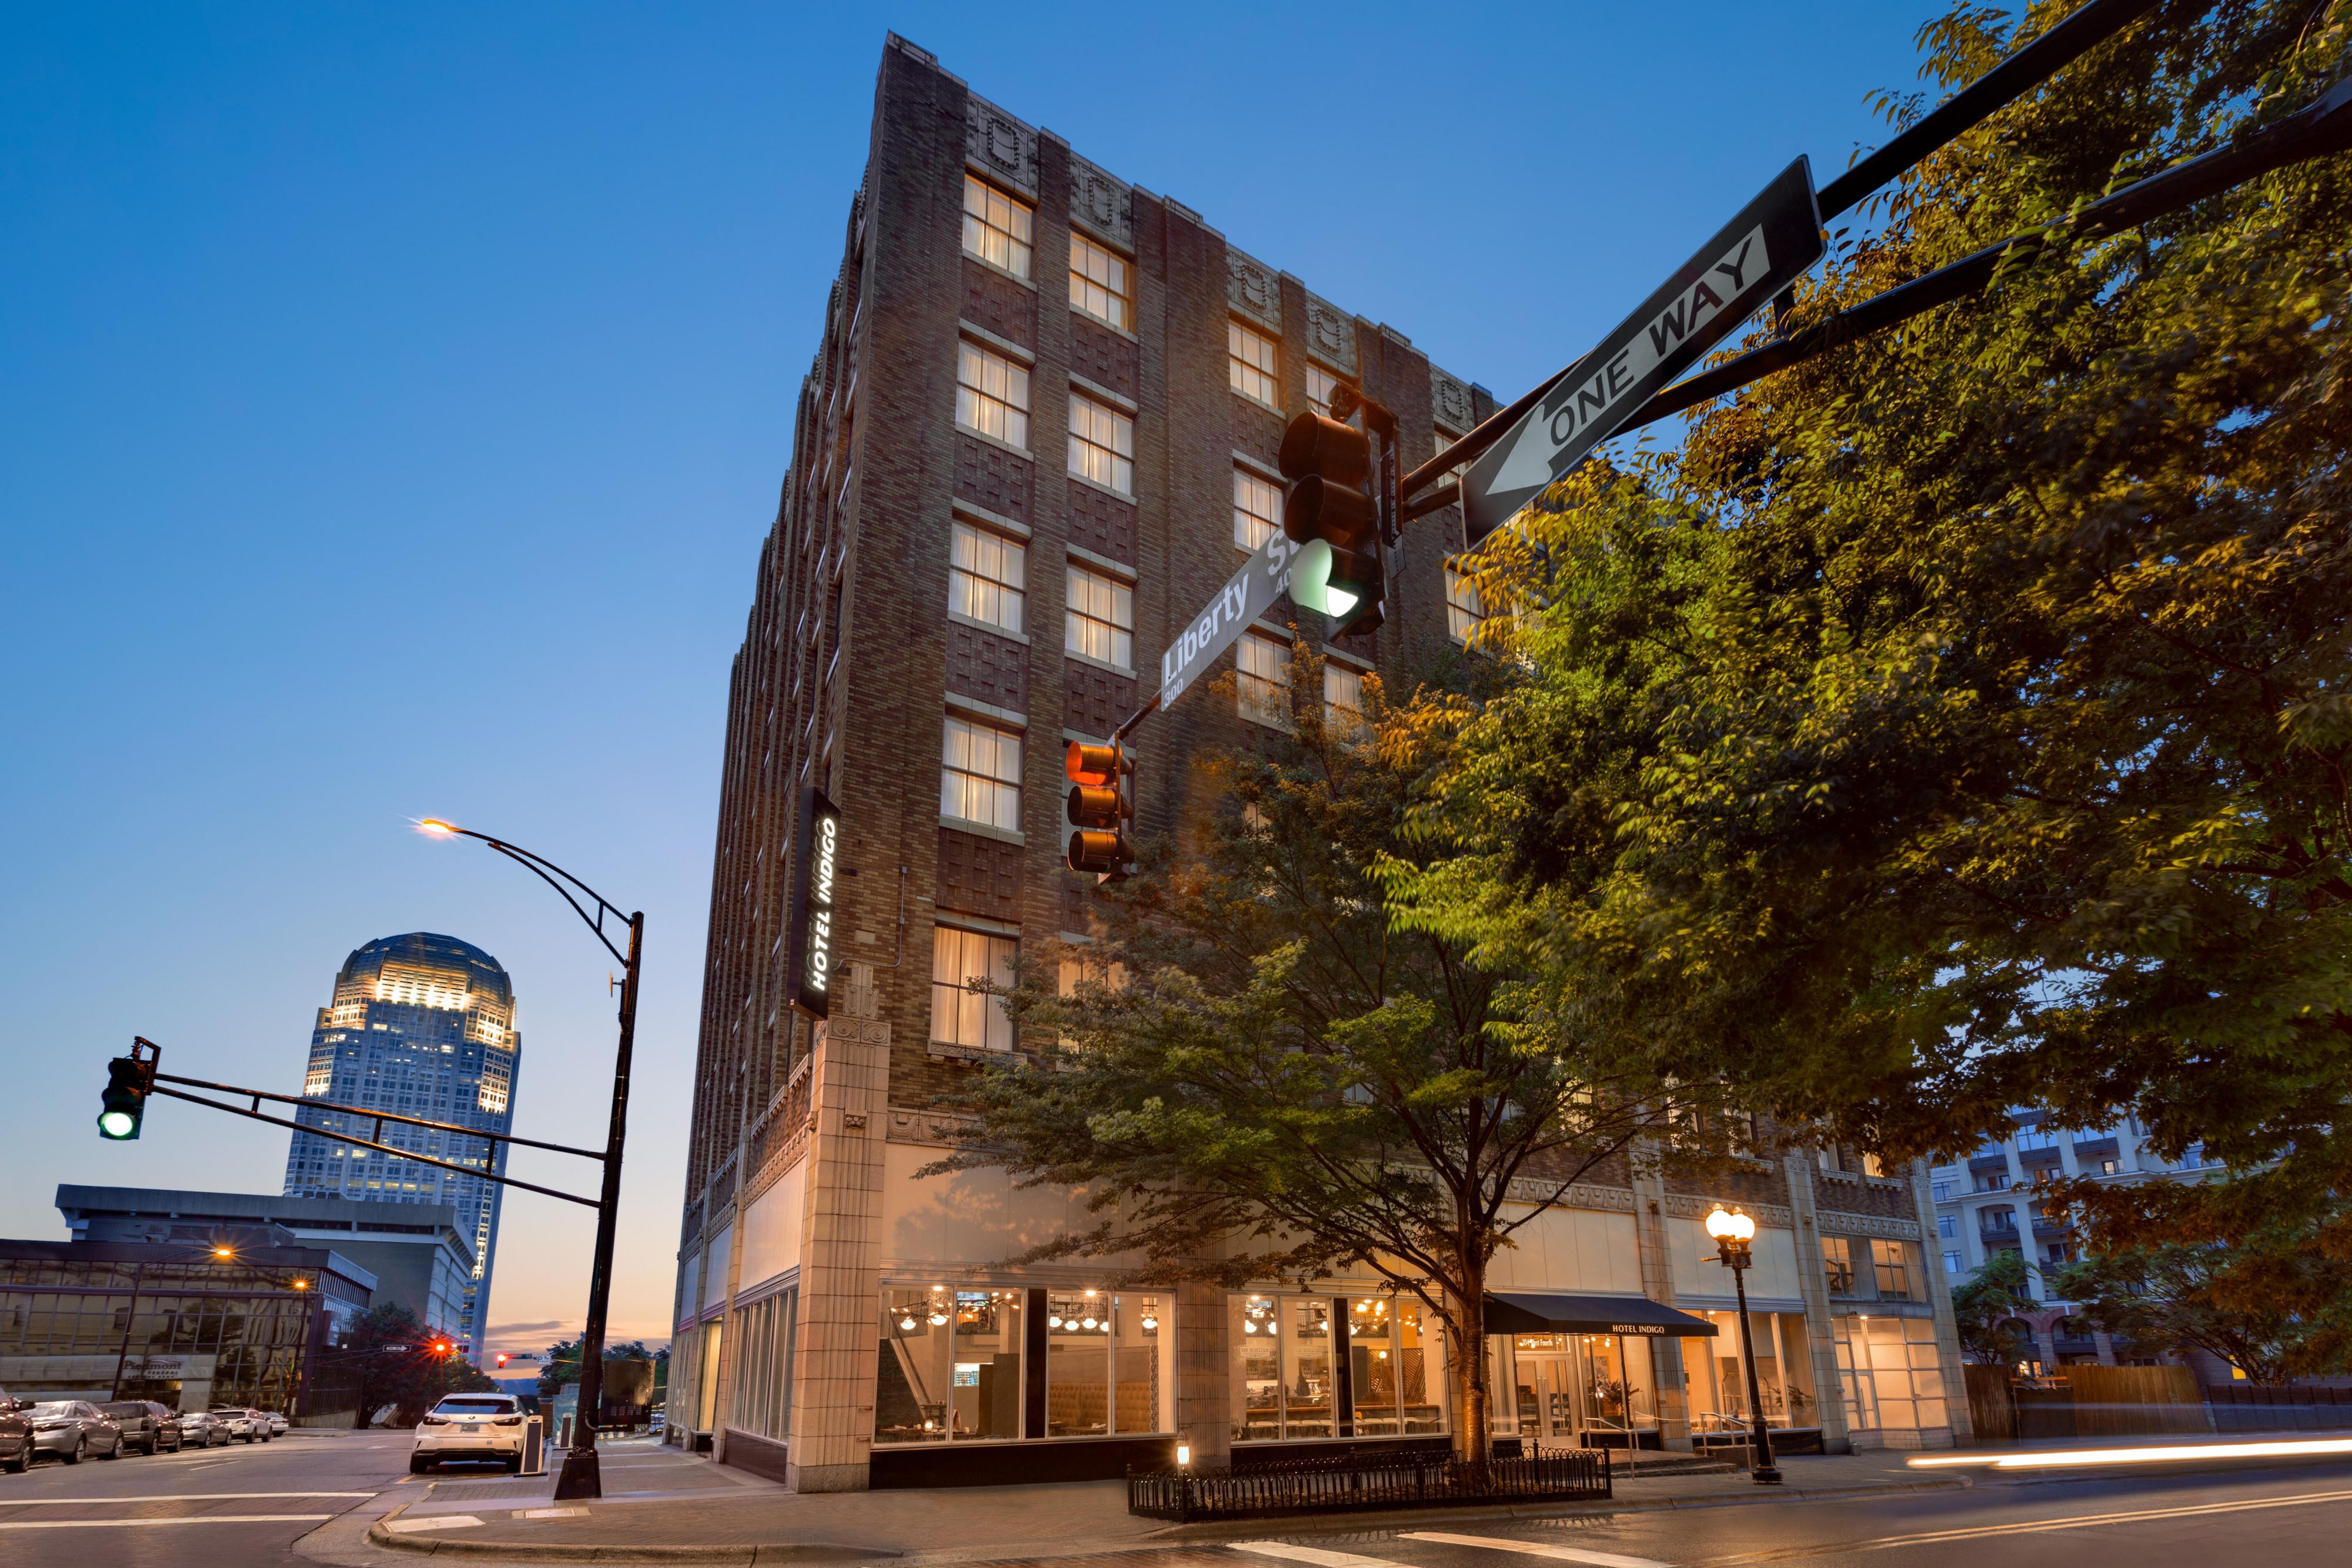 Hotel Indigo Winston-Salem Downtown opened its doors in the historic Pepper Building at Fourth and Liberty Streets, revitalizing a 1928 Winston-Salem art deco landmark and bringing a stylish boutique hotel experience to the city’s vibrant arts district.  